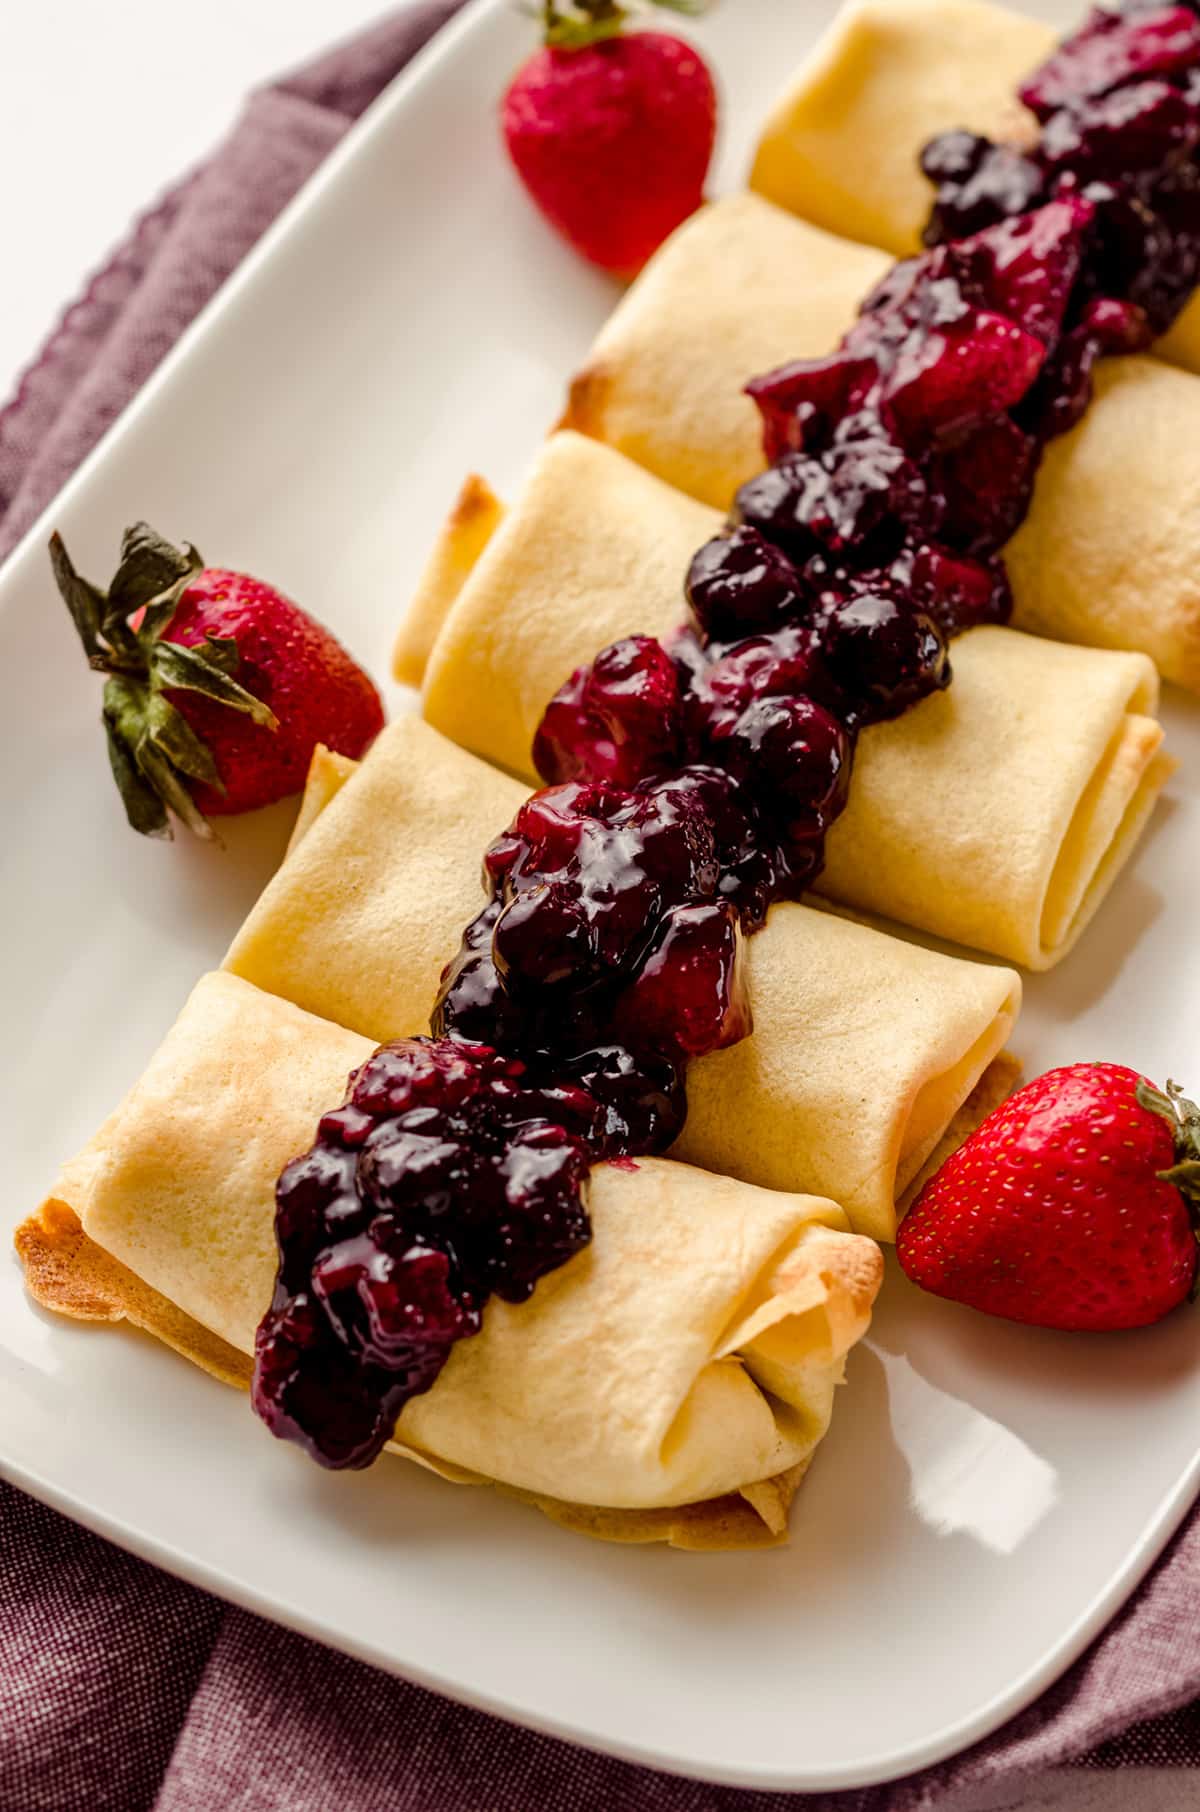 A platter of cheese blintzes and topped with berry compote.